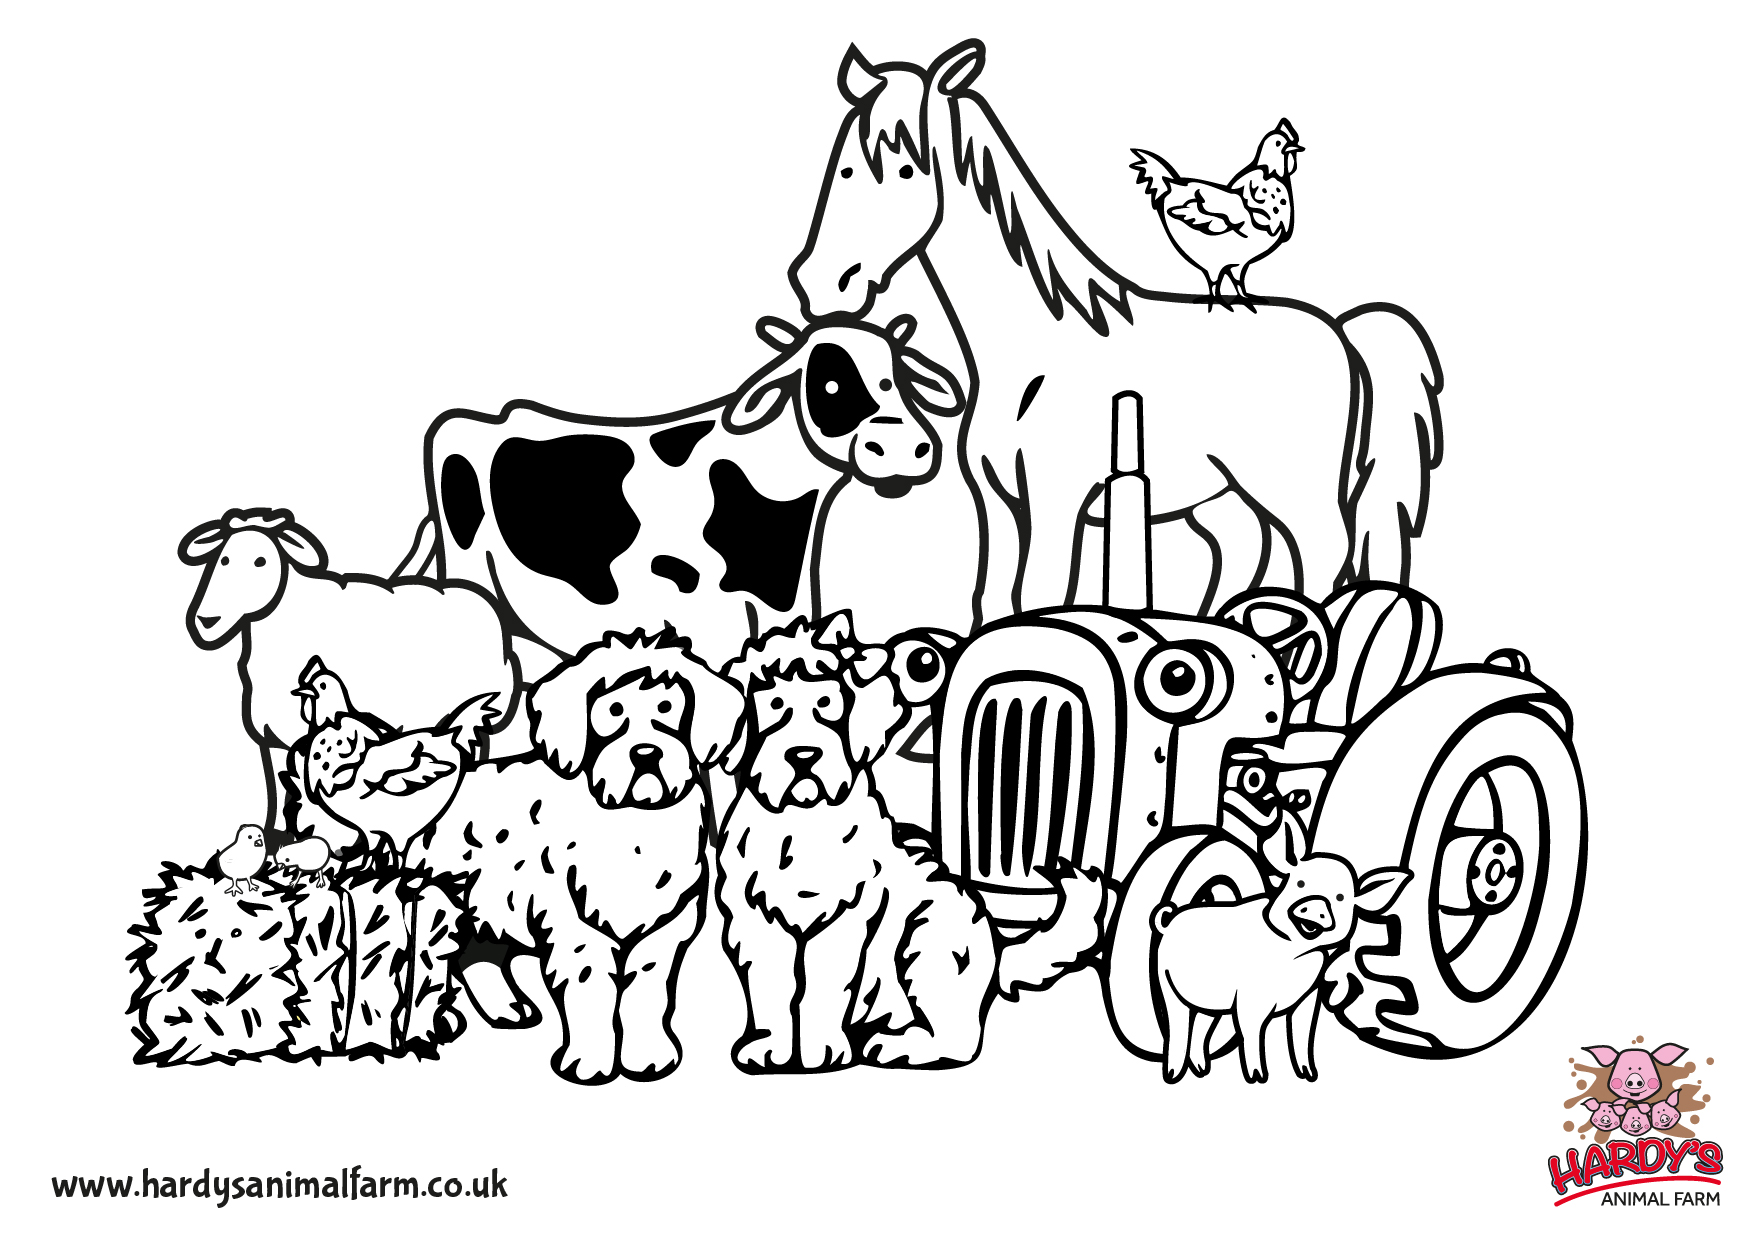 colouring-pages-hardys-animal-farm